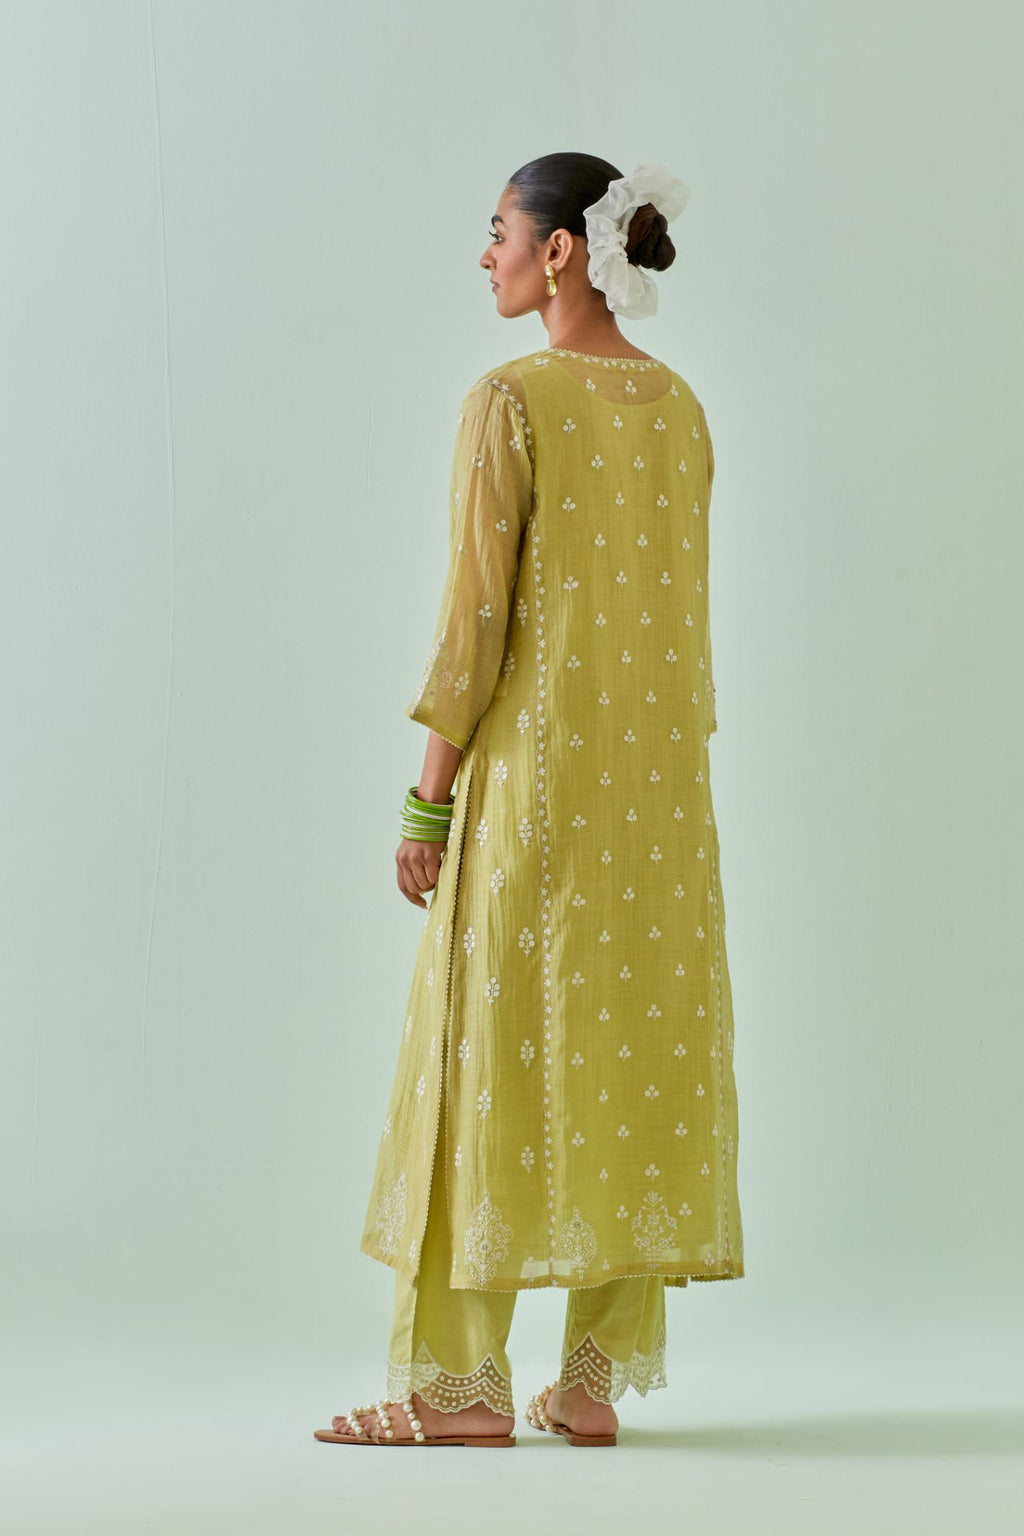 Green straight kurta set with all-over off white Dori embroidery, highlighted with delicate beaded work and embroidery detail at side panel joint seams.